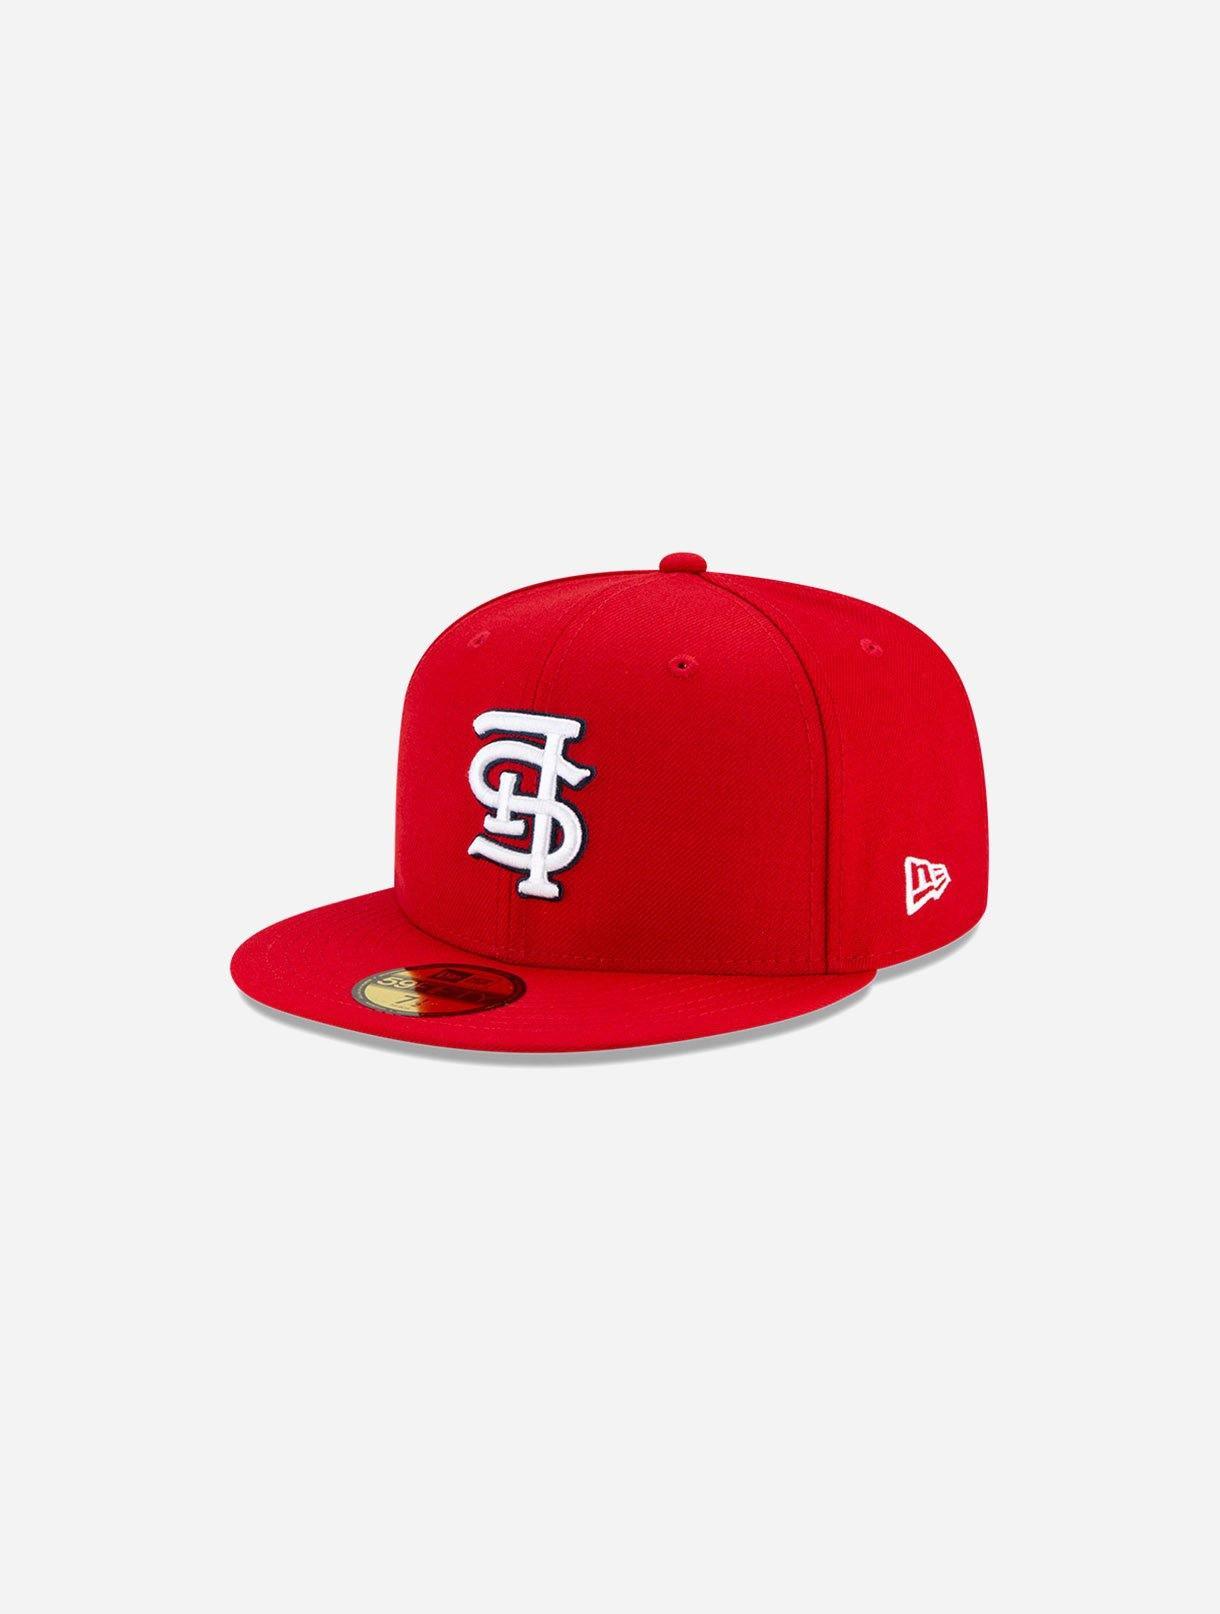 Men's New Era Red St. Louis Cardinals Upside Down 59FIFTY Fitted Hat